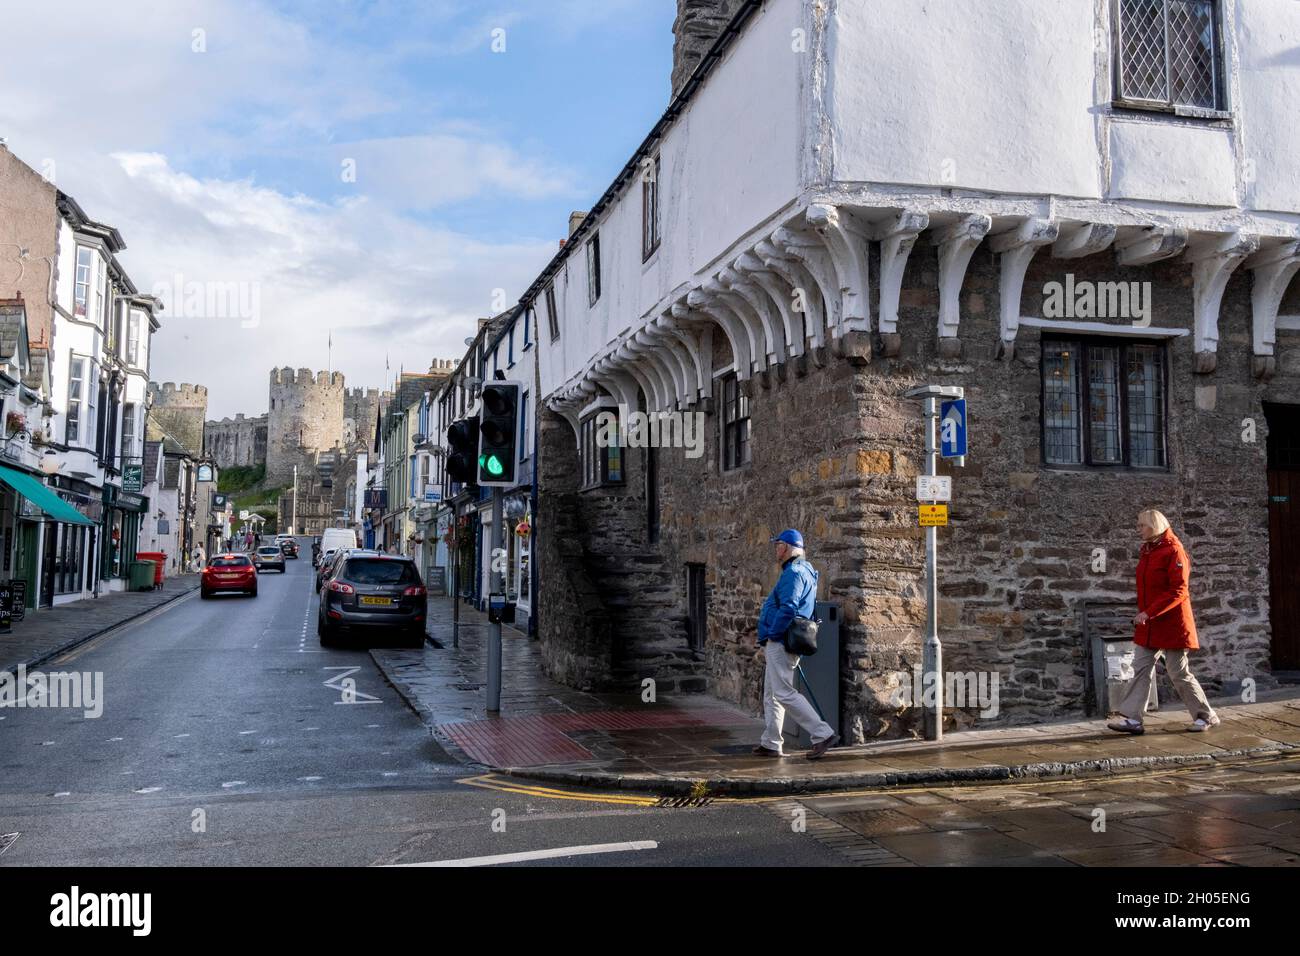 With the medieval castle dominating the town, a couple walk past the 14th century Merchant's House on Conwy high street, on 4th October 2021, in Conwy, Gwynedd, Wales. The walls were constructed between 1283 and 1287 after the foundation of Conwy by Edward I, and were designed to form an integrated system of defence alongside Conwy Castle. The walls are 1.3 km (0.81 mi) long and include 21 towers and three gatehouses. Conwy is a walled market town and community on the north coast of Wales. Stock Photo